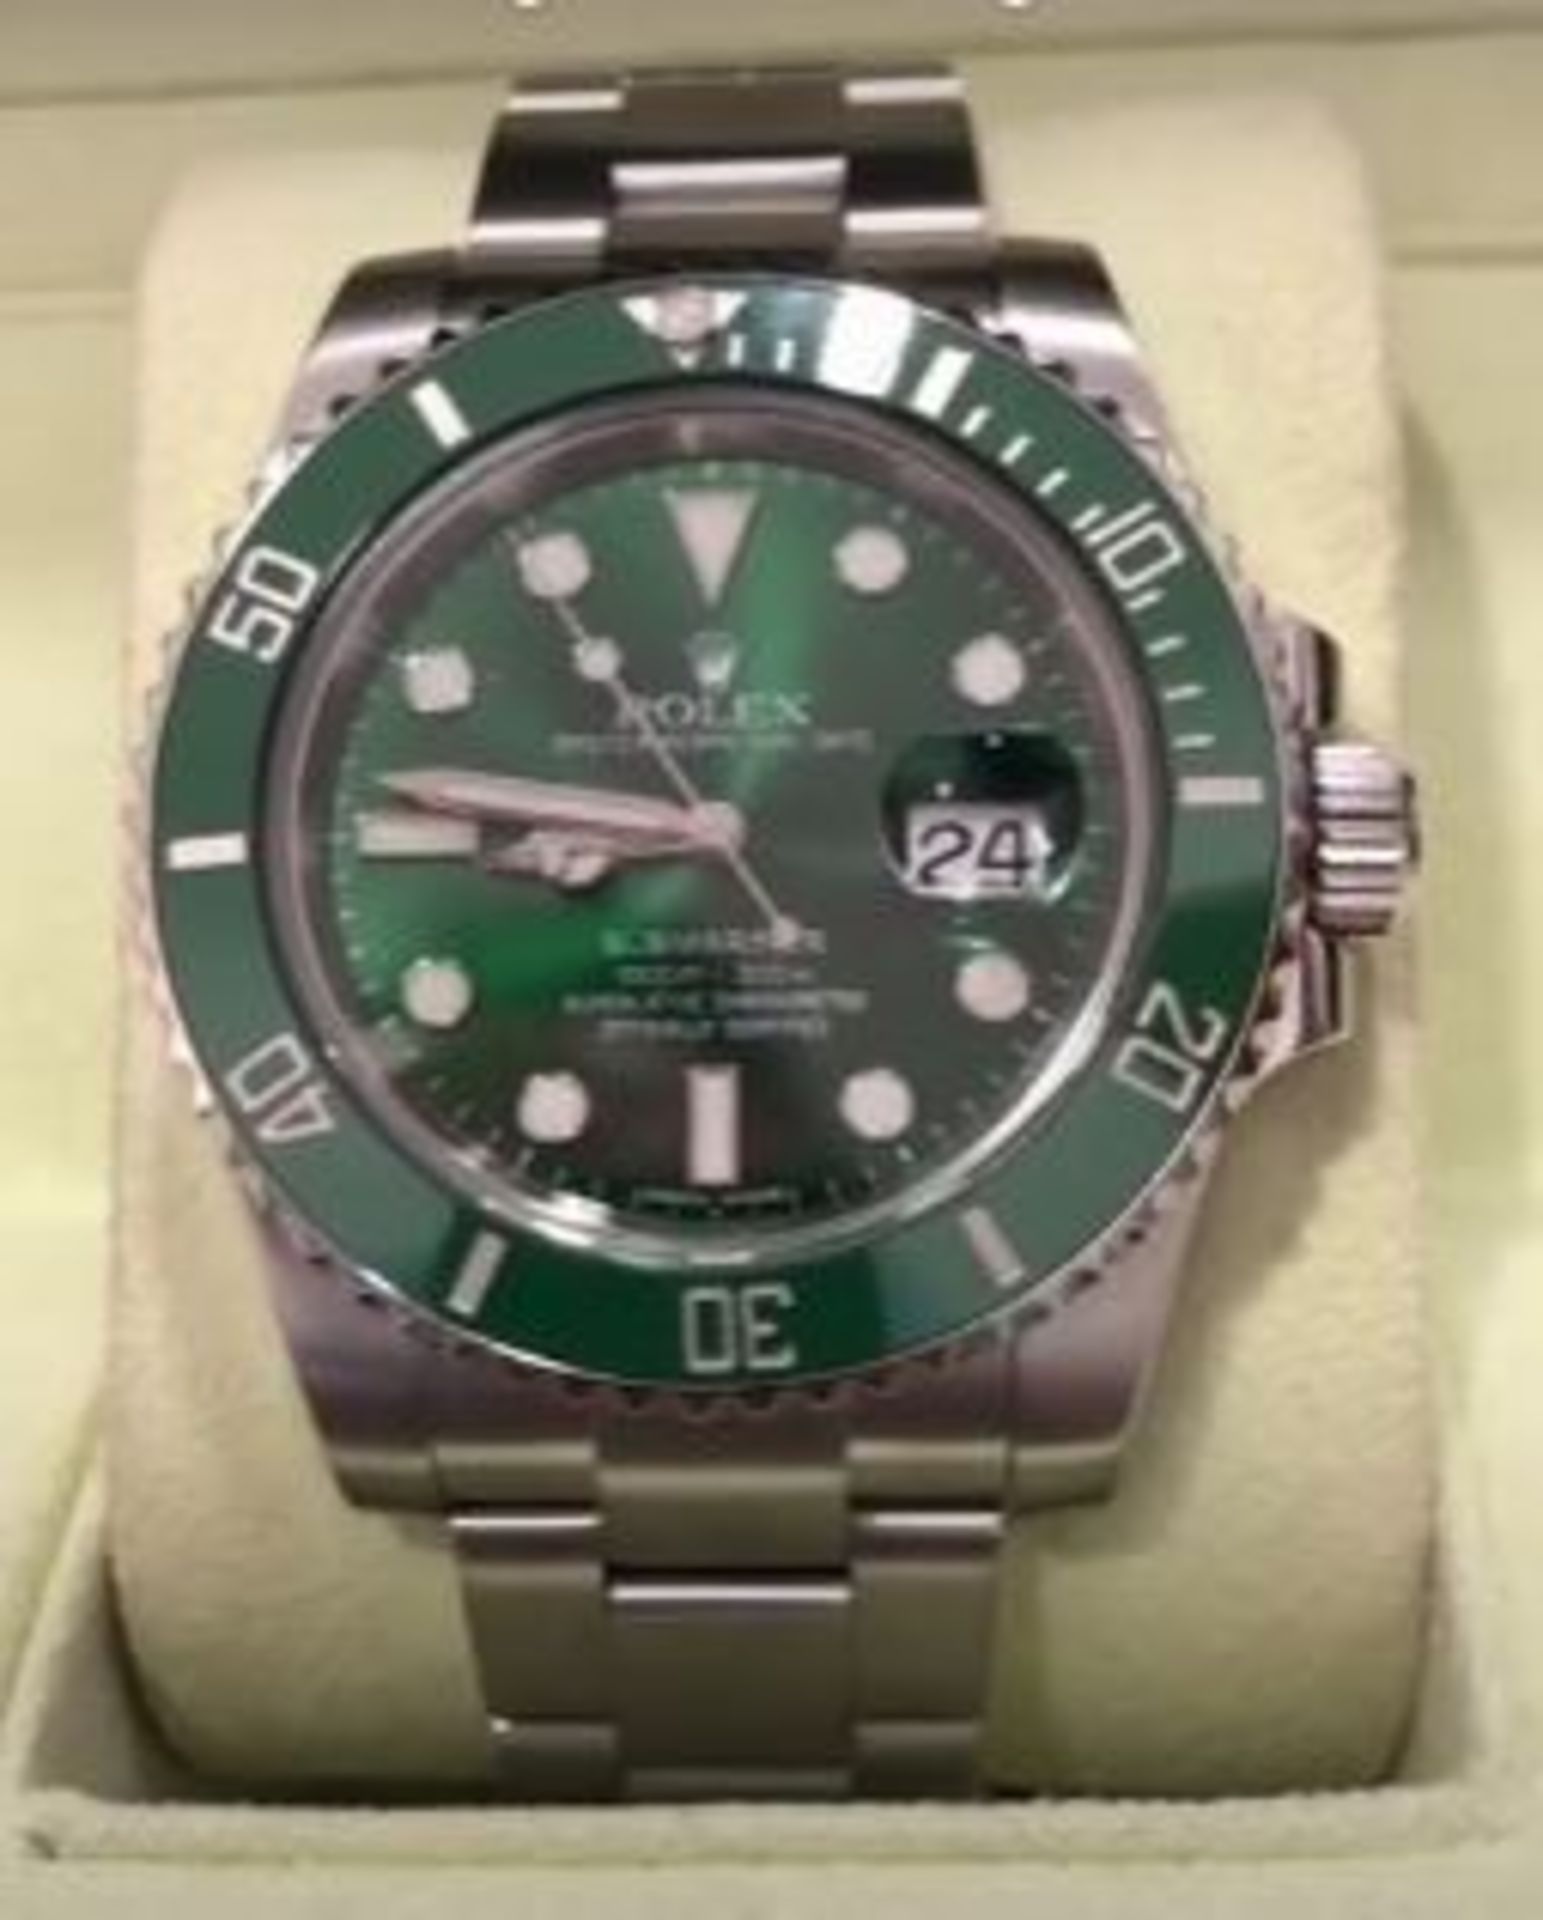 RRP £25,000 Rolex Submariner Stainless Steel, Green Dial & Green Bezel, Model Number 116610Lv. Boxed